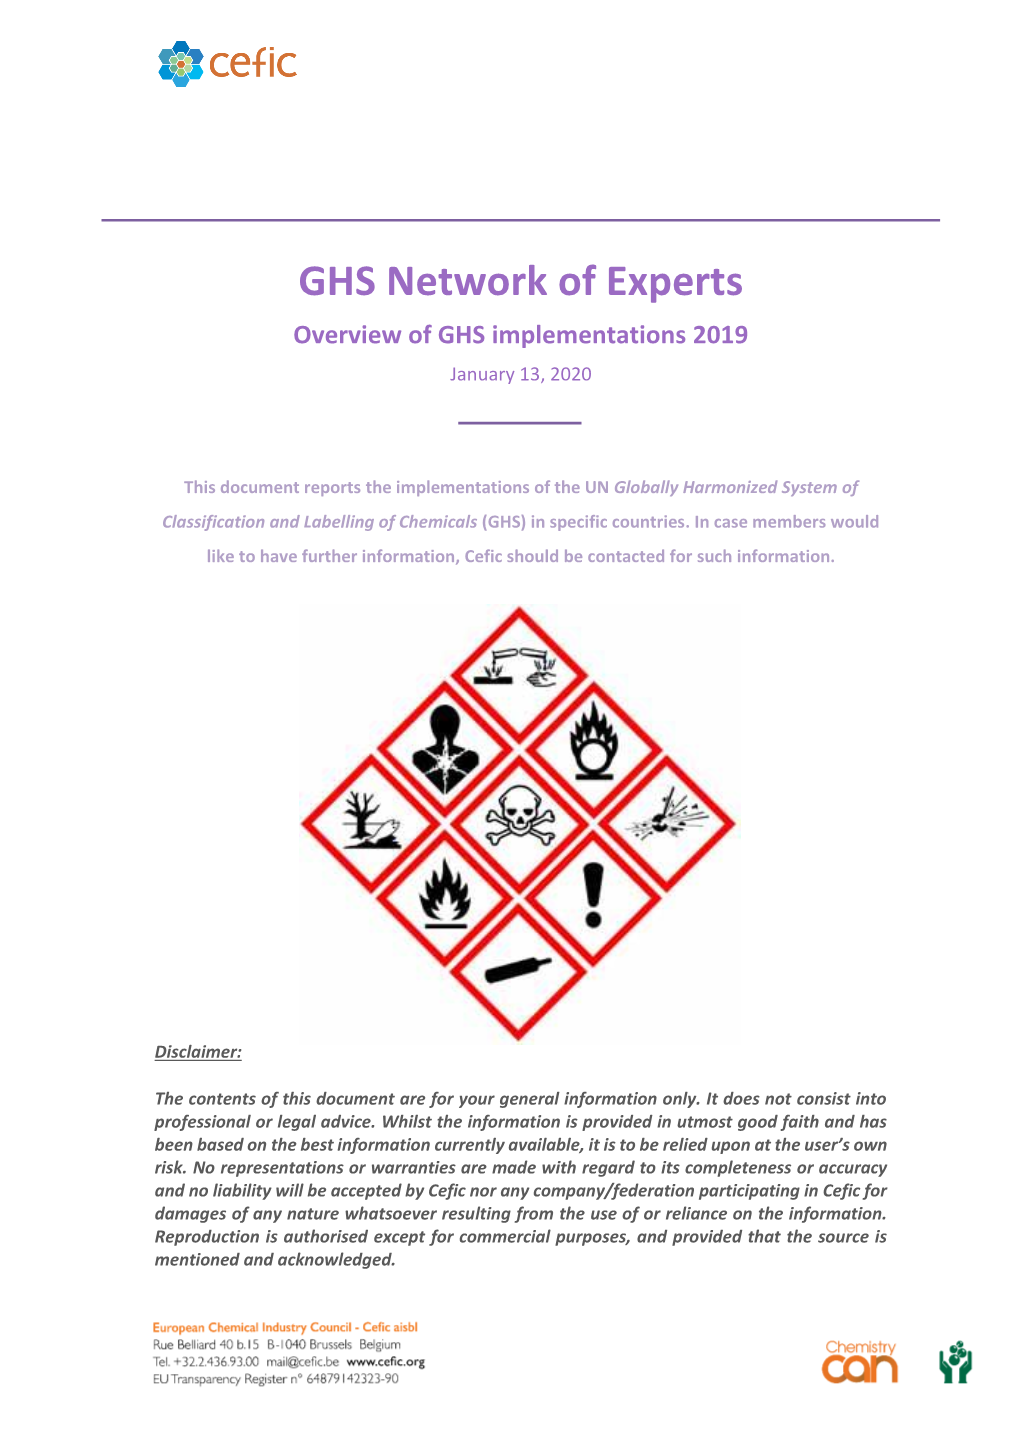 GHS Network of Experts Overview of GHS Implementations 2019 January 13, 2020